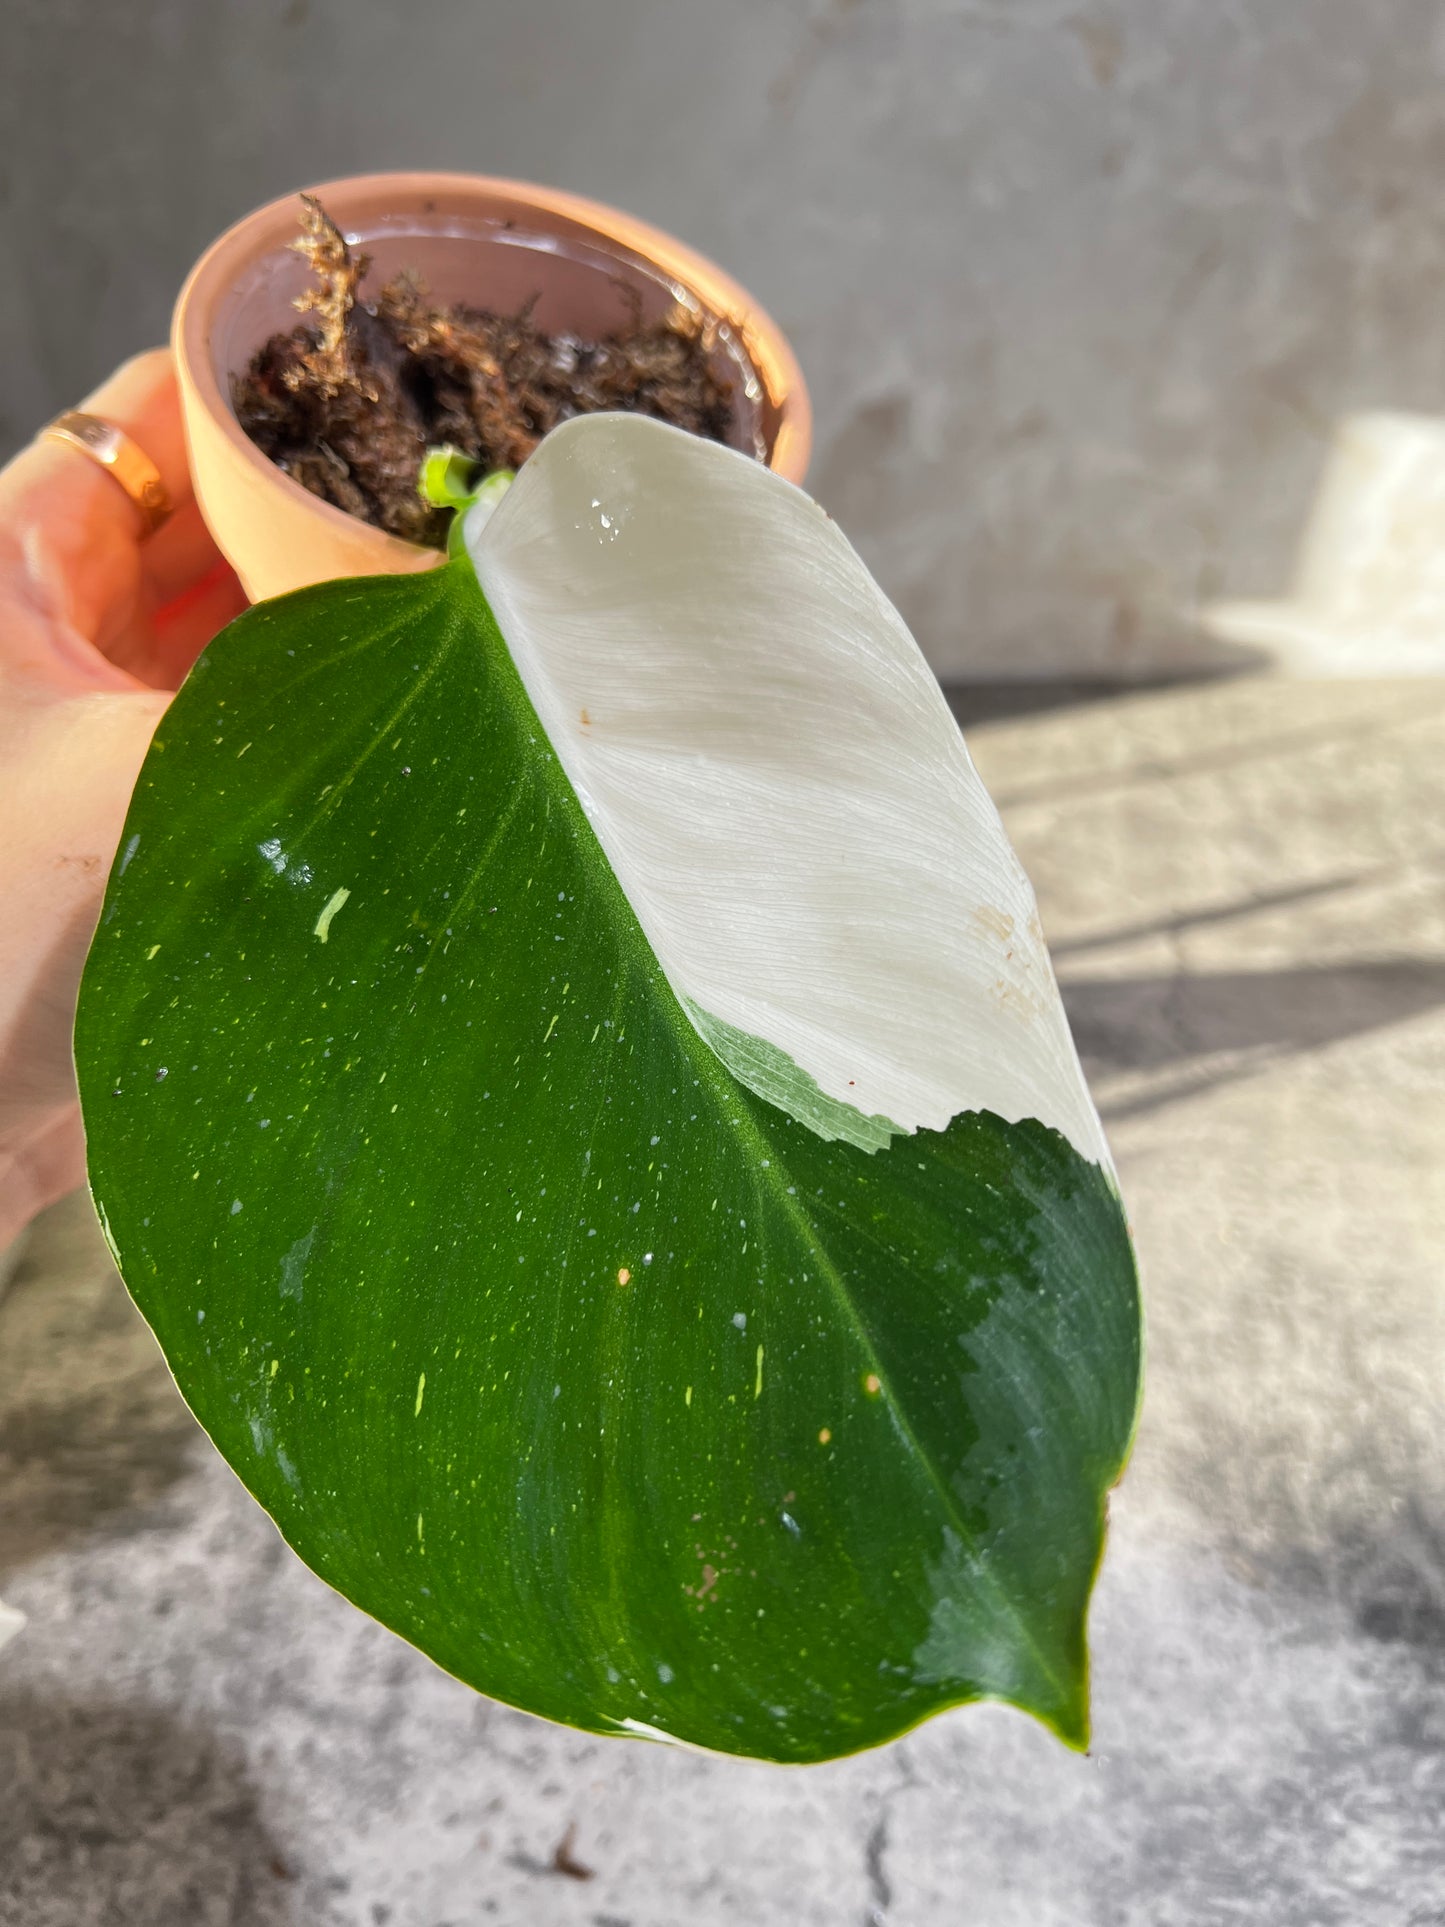 Philodendron white wizard rooting 1 leaf highly Variegated